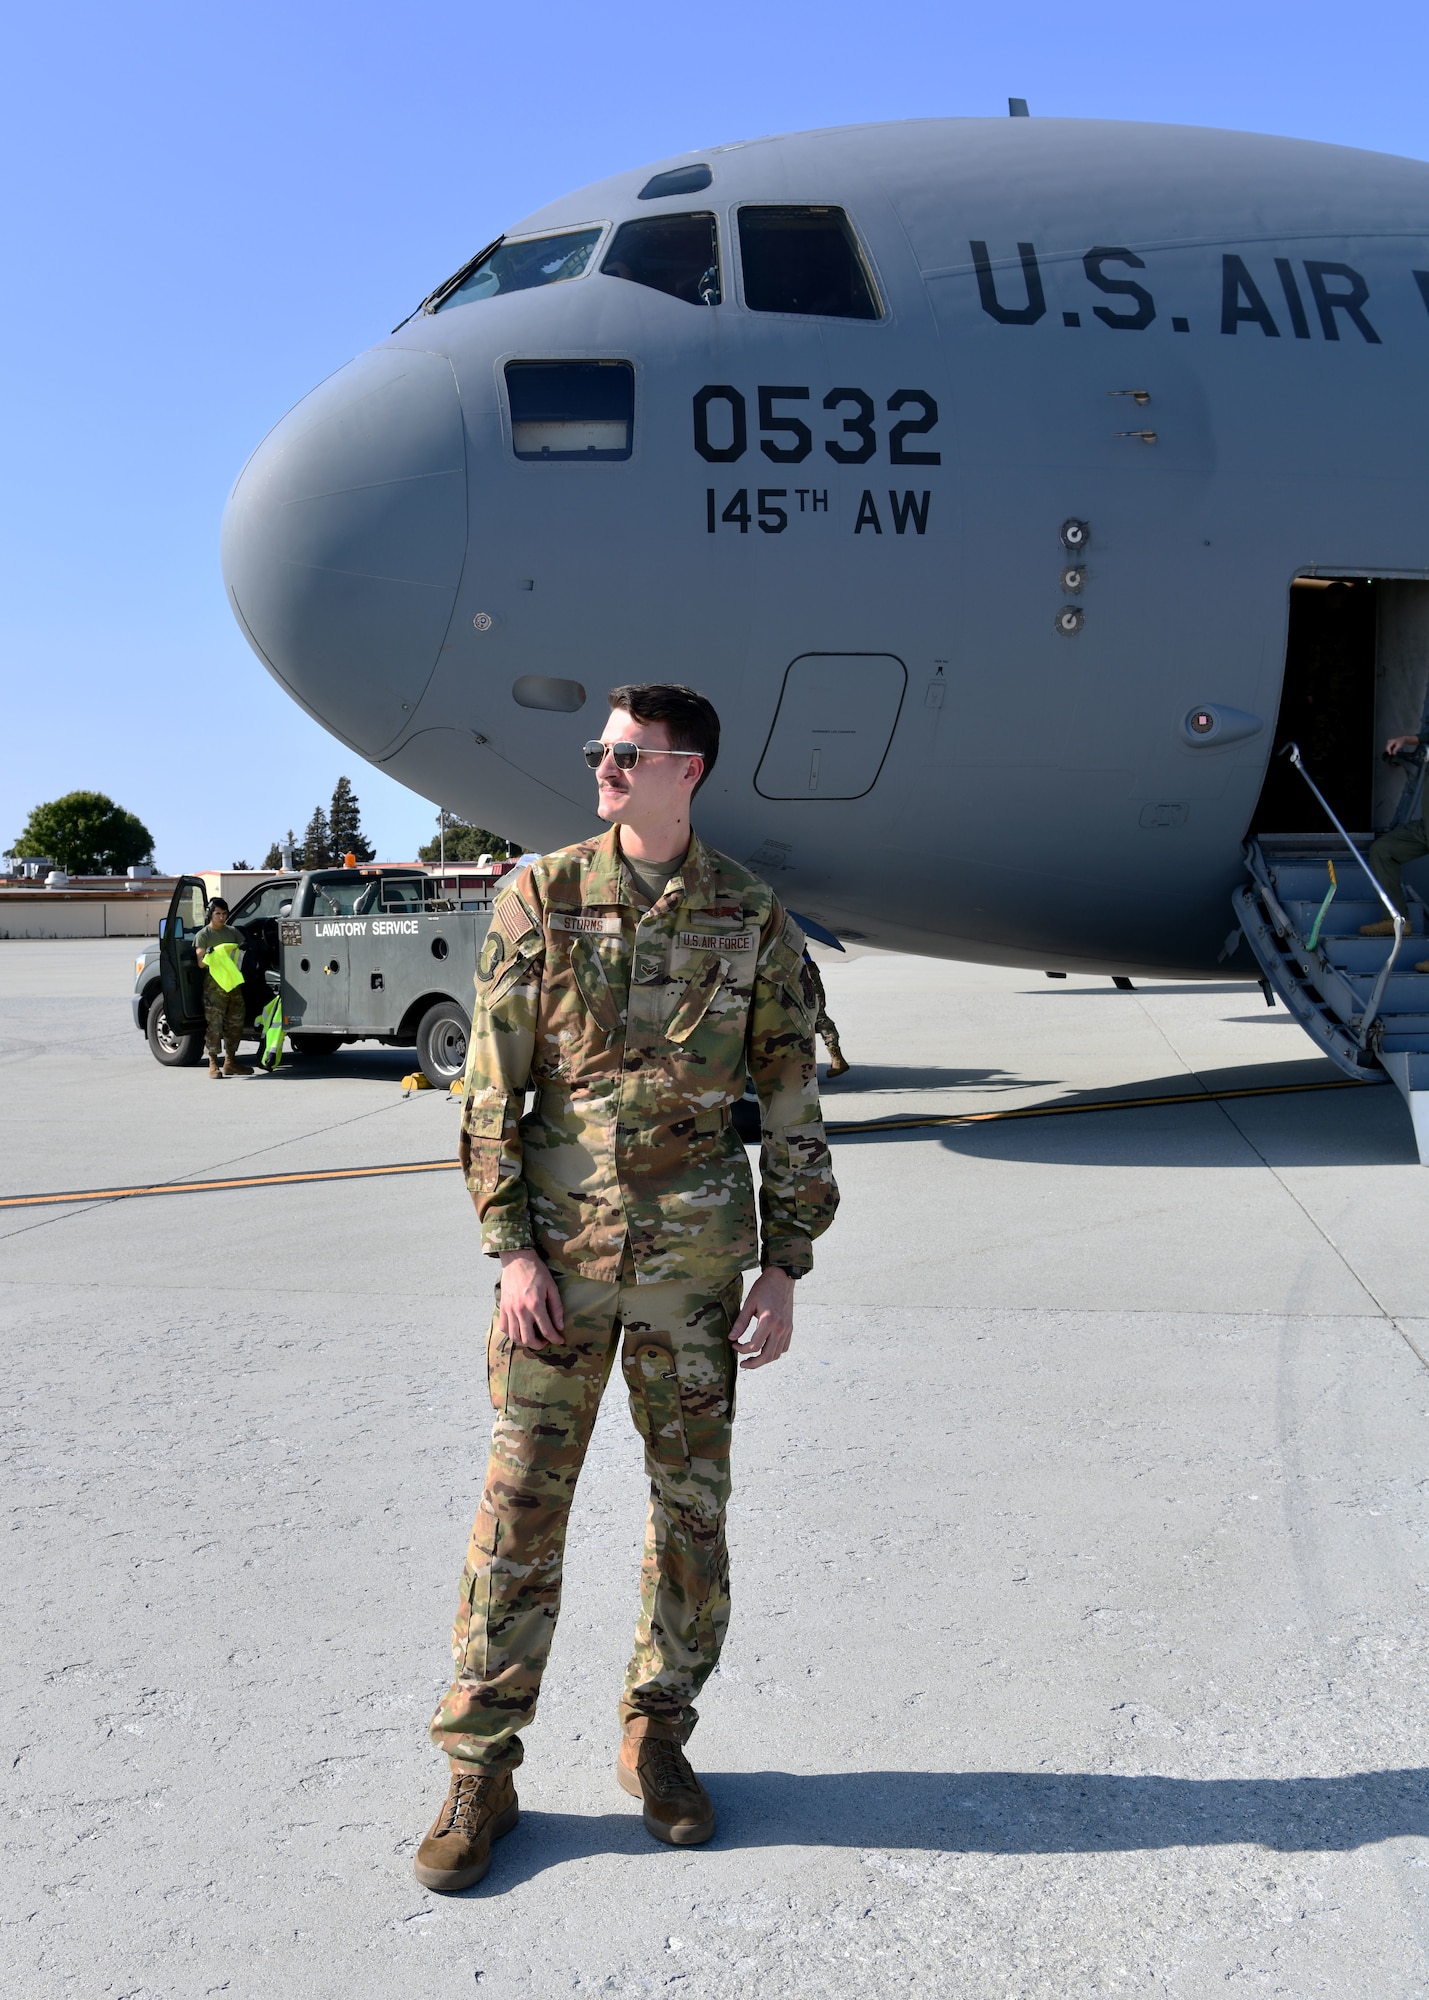 Airman 1st Class Ian Storm, 145th Airlift Wing loadmaster, stands to the side of a C-17 Globemaster III at Travis Air Force Base, California, April 23, 2022. Storm assisted with the transport of 47 Airmen from the 104th Fighter Wing and 174th Attack Wing to Honolulu, Hawaii to complete training at Tripler Army Medical Center. (U.S. Air National Guard Photo by Senior Airman Camille Lienau)